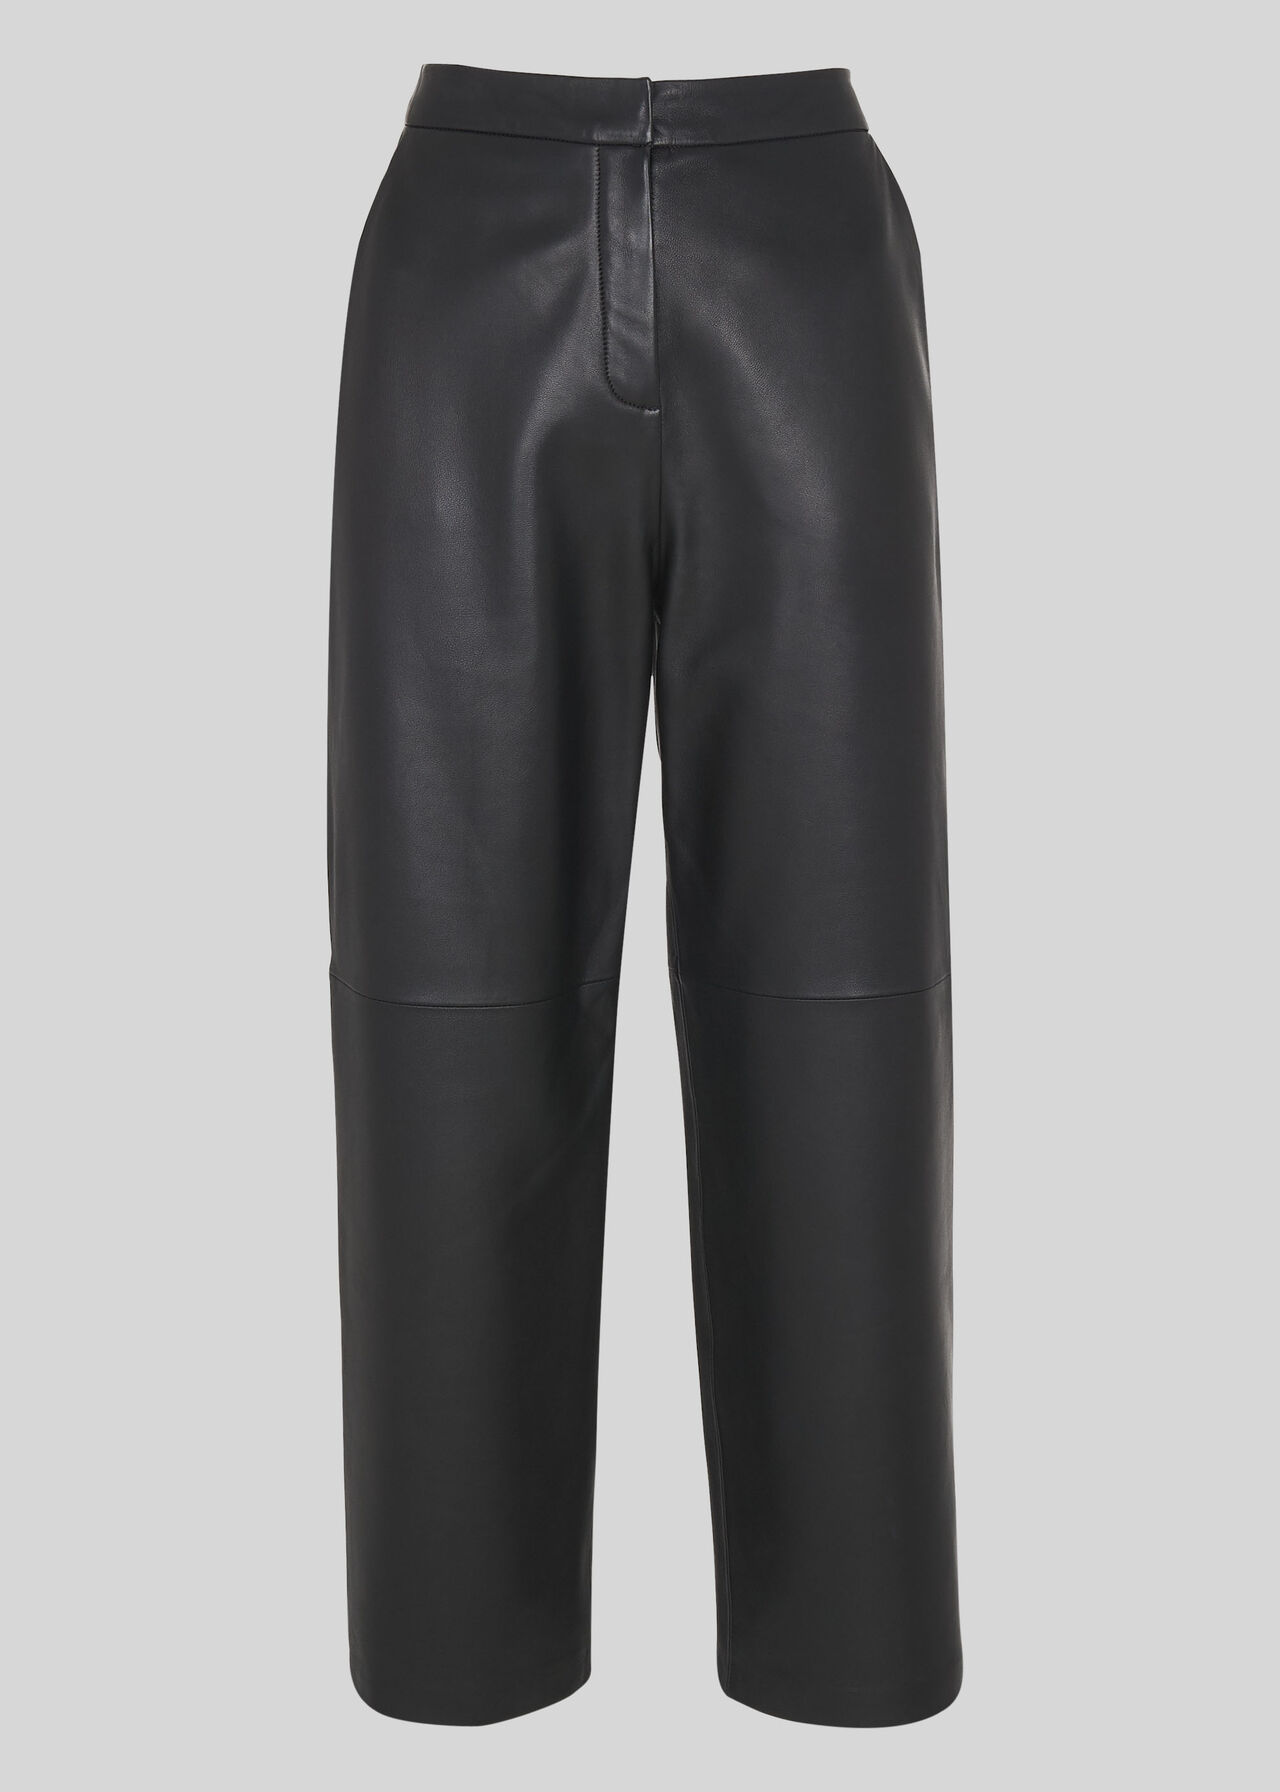 Leather Flat Front Trouser Black